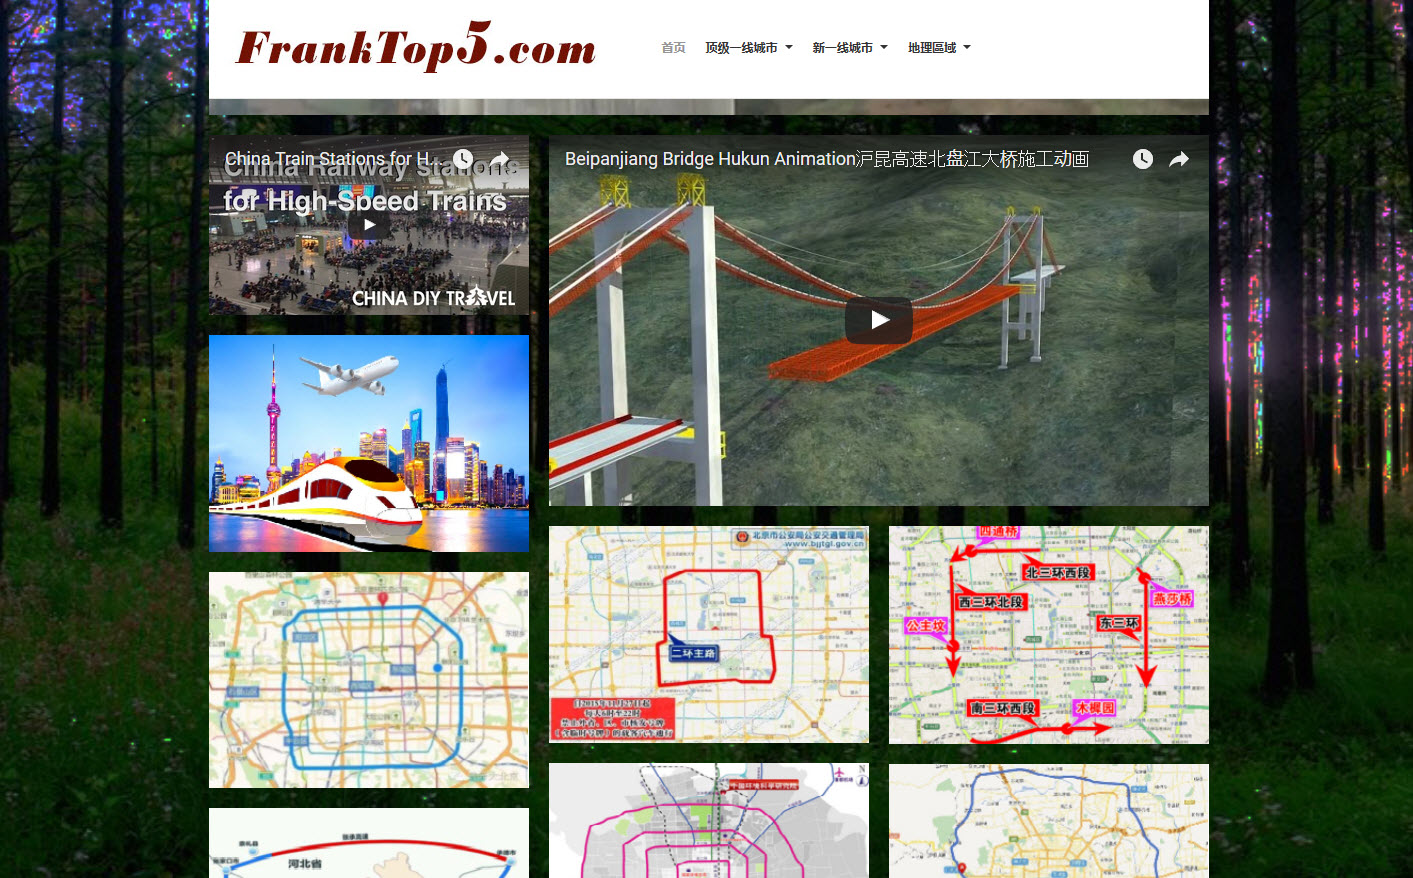 Franktop5: Major Constructional Projects